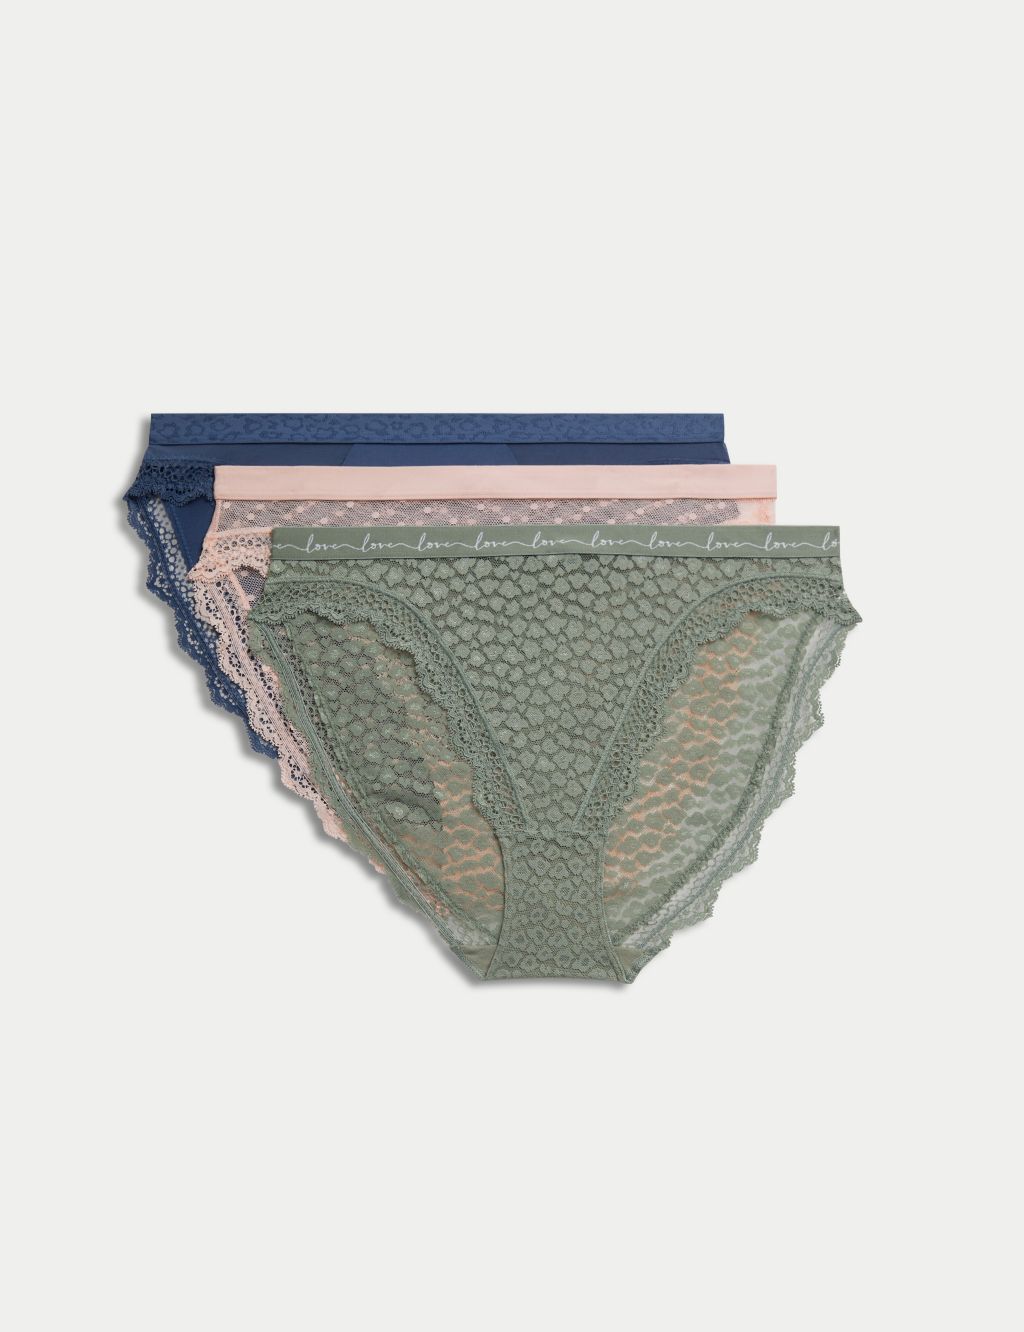 30.81% OFF on Marks & Spencer Women Panties High Leg Knickers